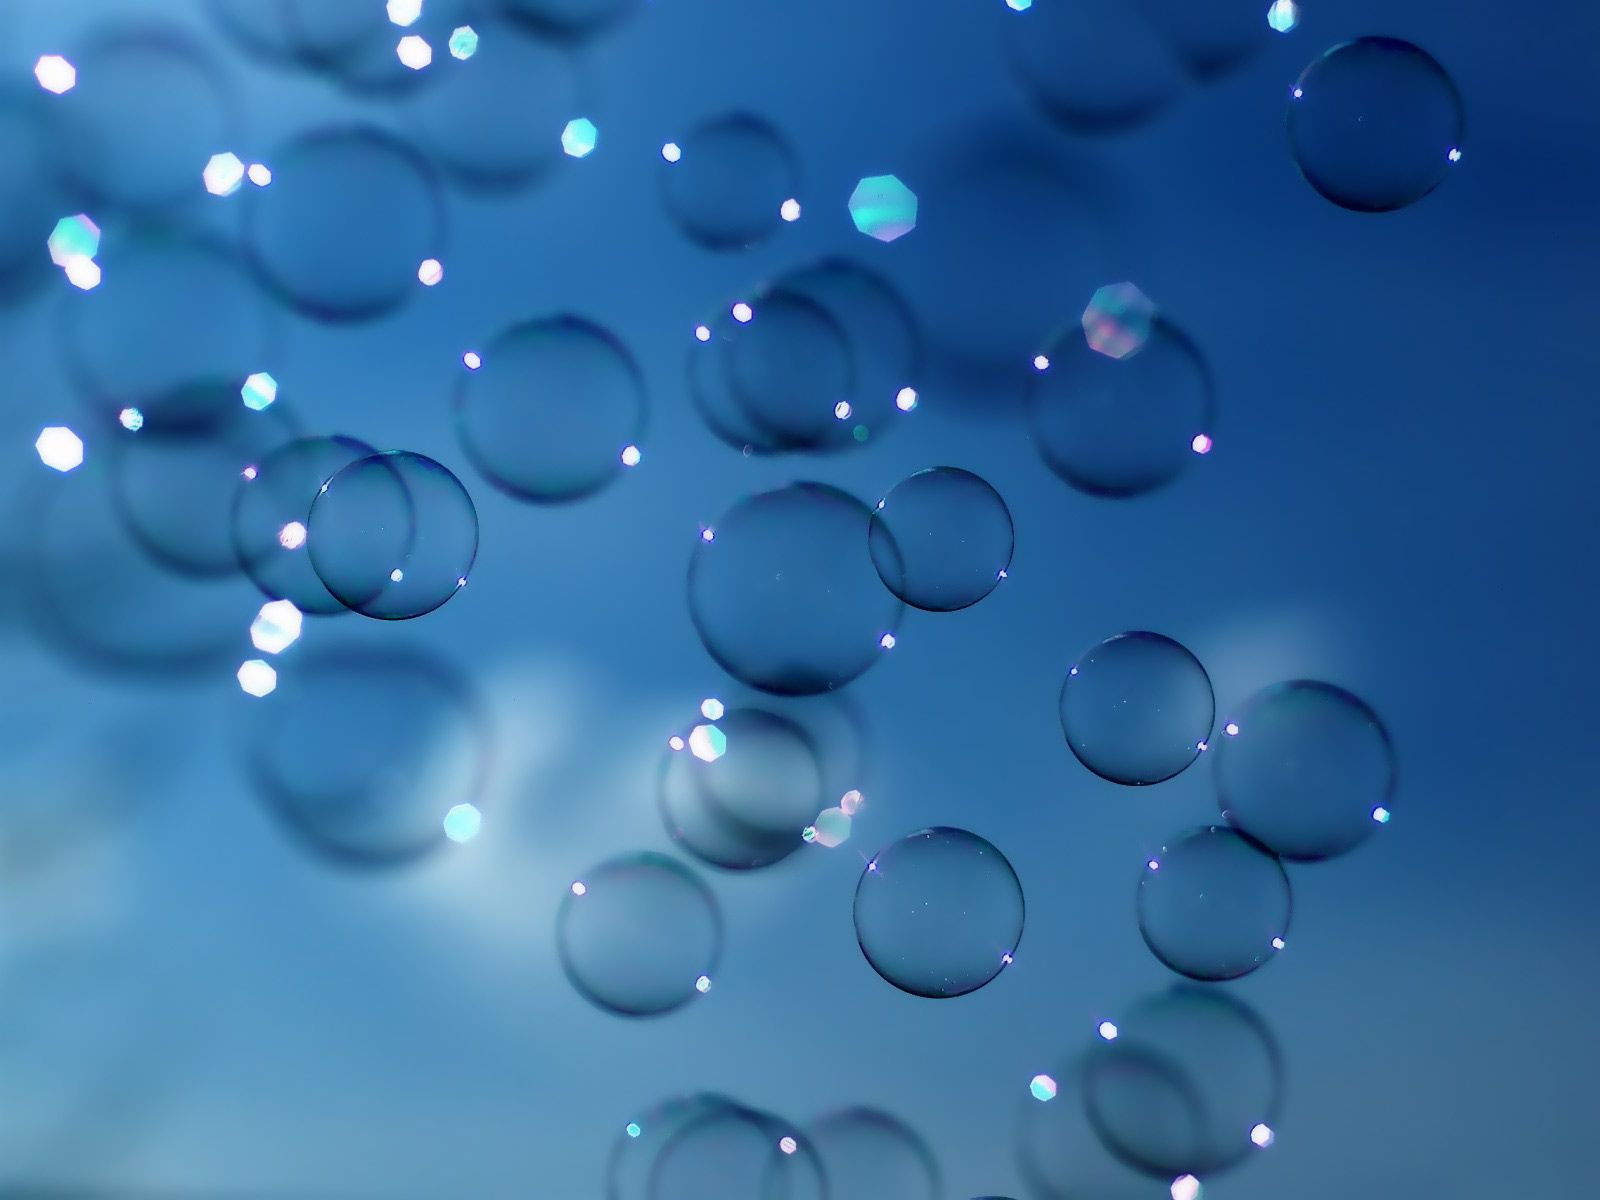 Desktop Background with bubbles. Its nice and light and it wouldn't inhibit any of the icons o. Desktop wallpaper art, Cool desktop background, Bubbles wallpaper